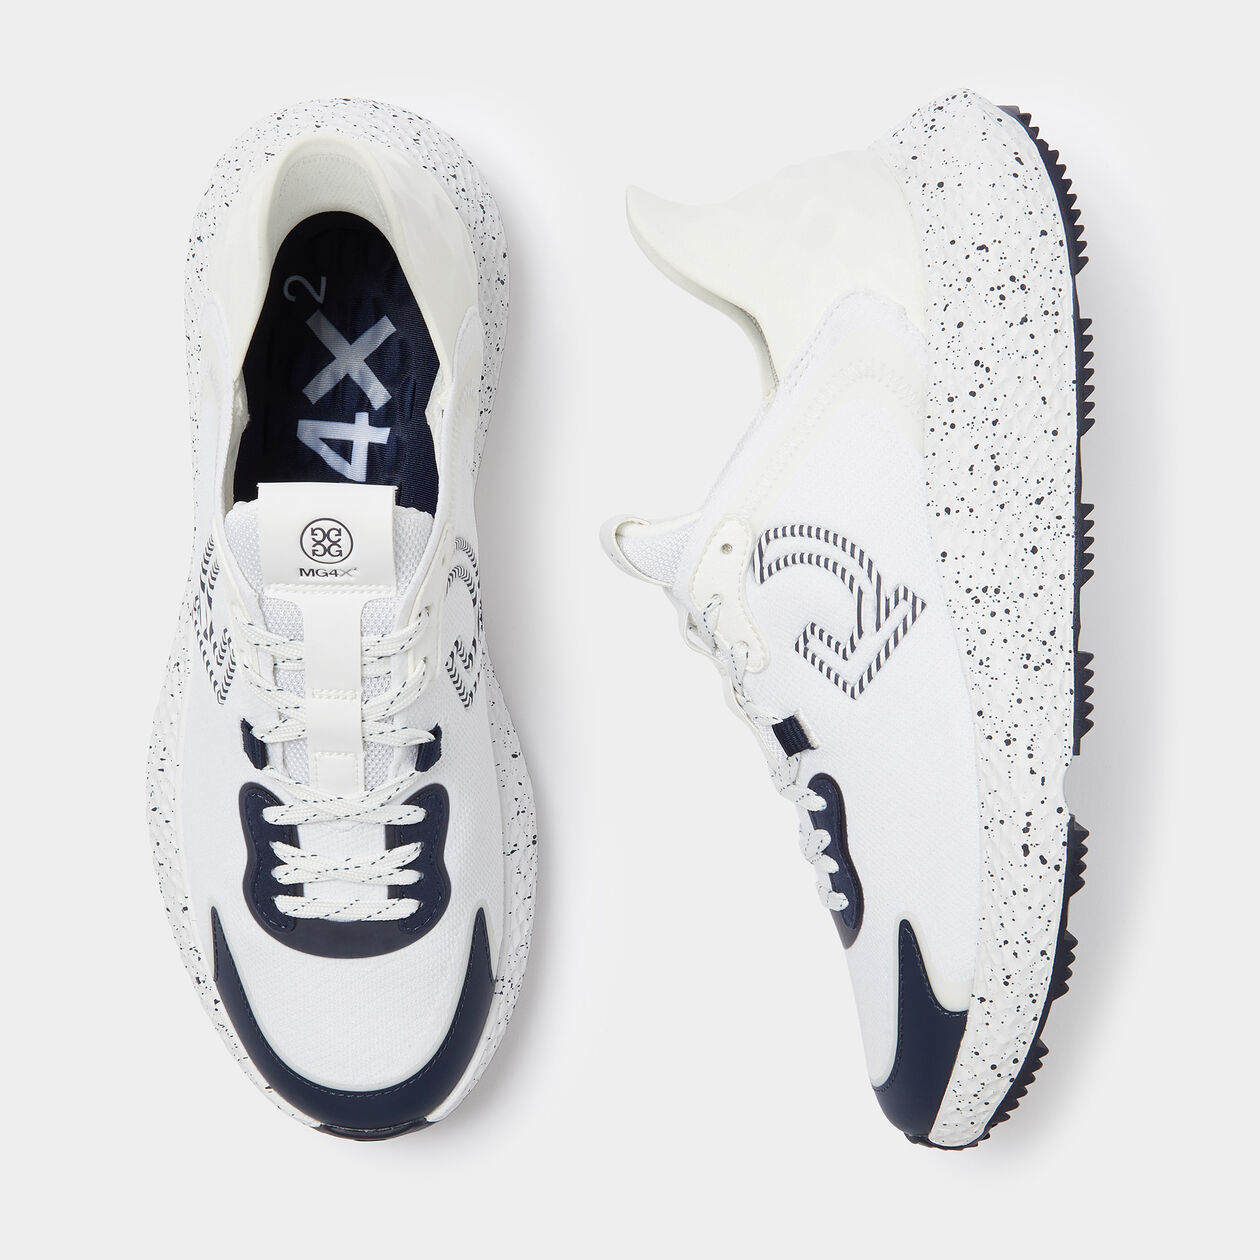 Louis Vuitton Glitter Accents Sneakers 10.5